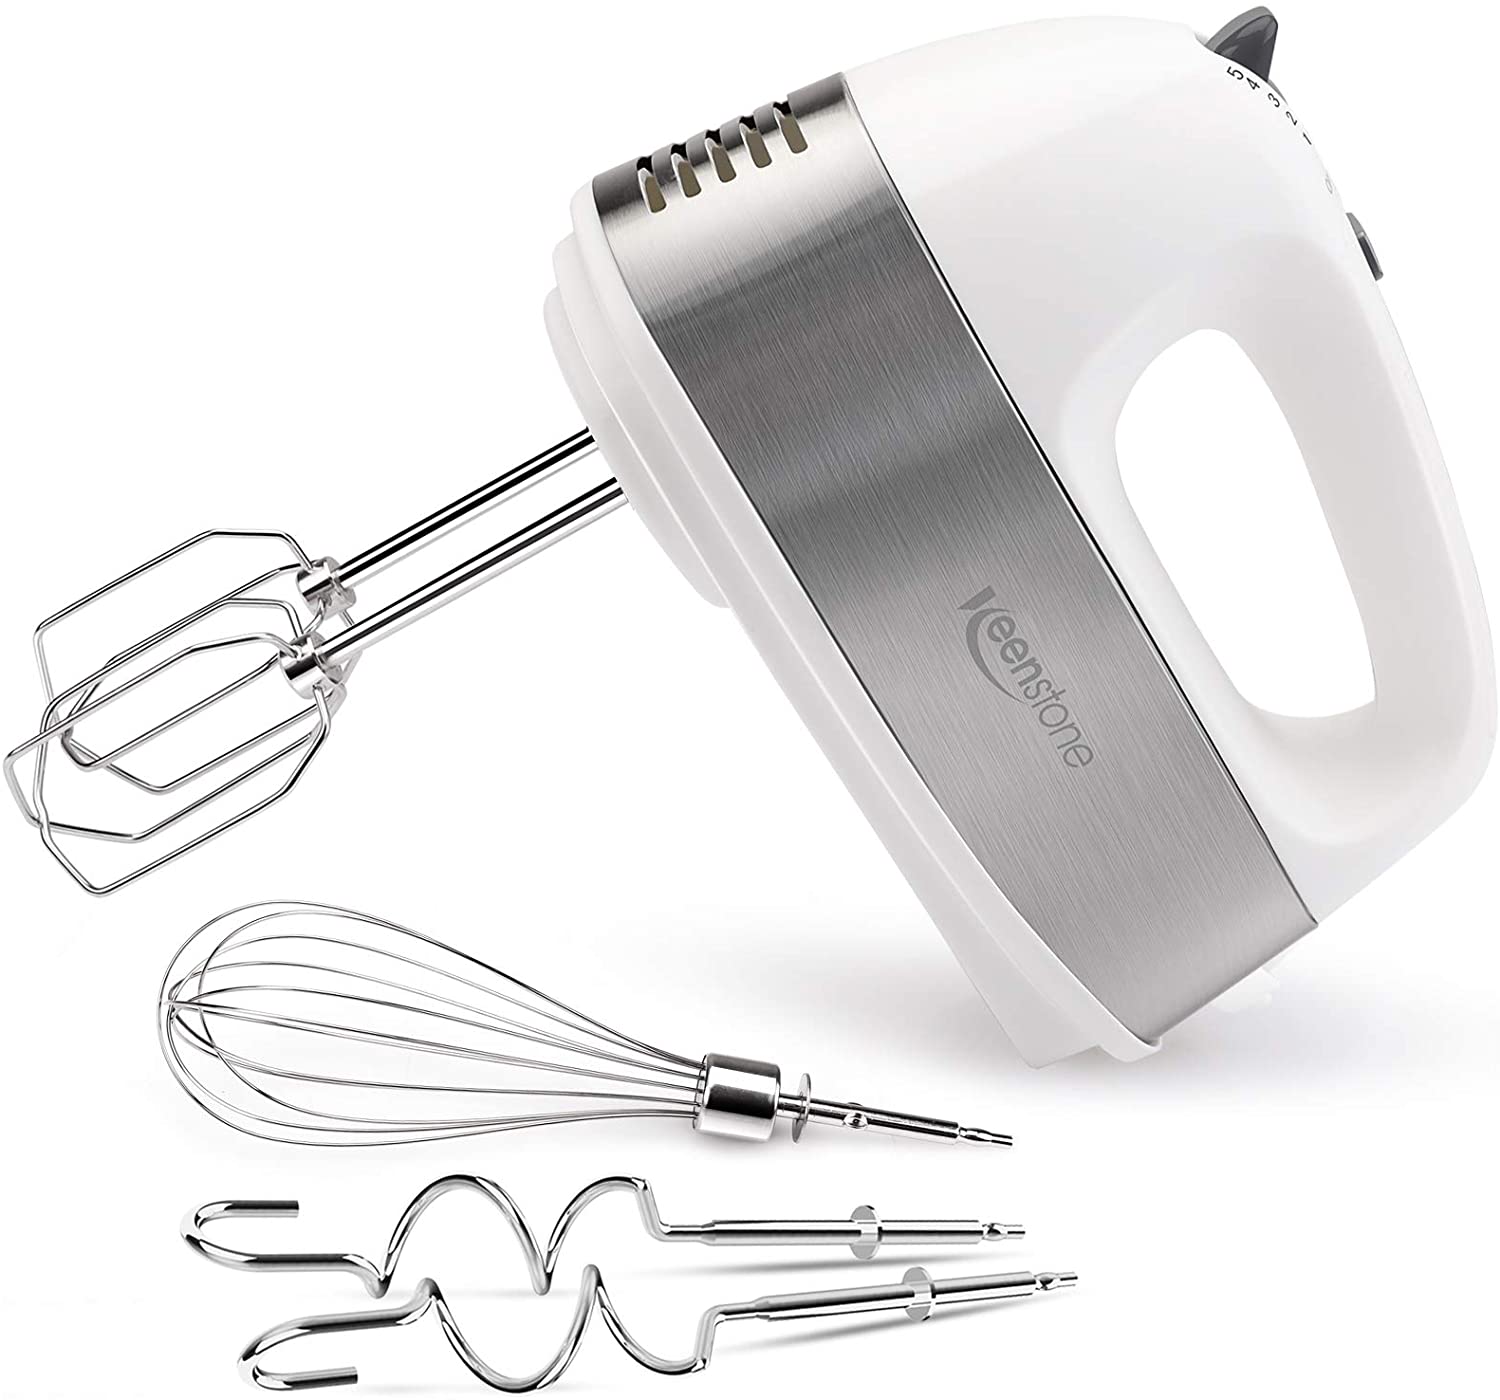 Keenstone Electric hand mixer with turbo level hand mixer